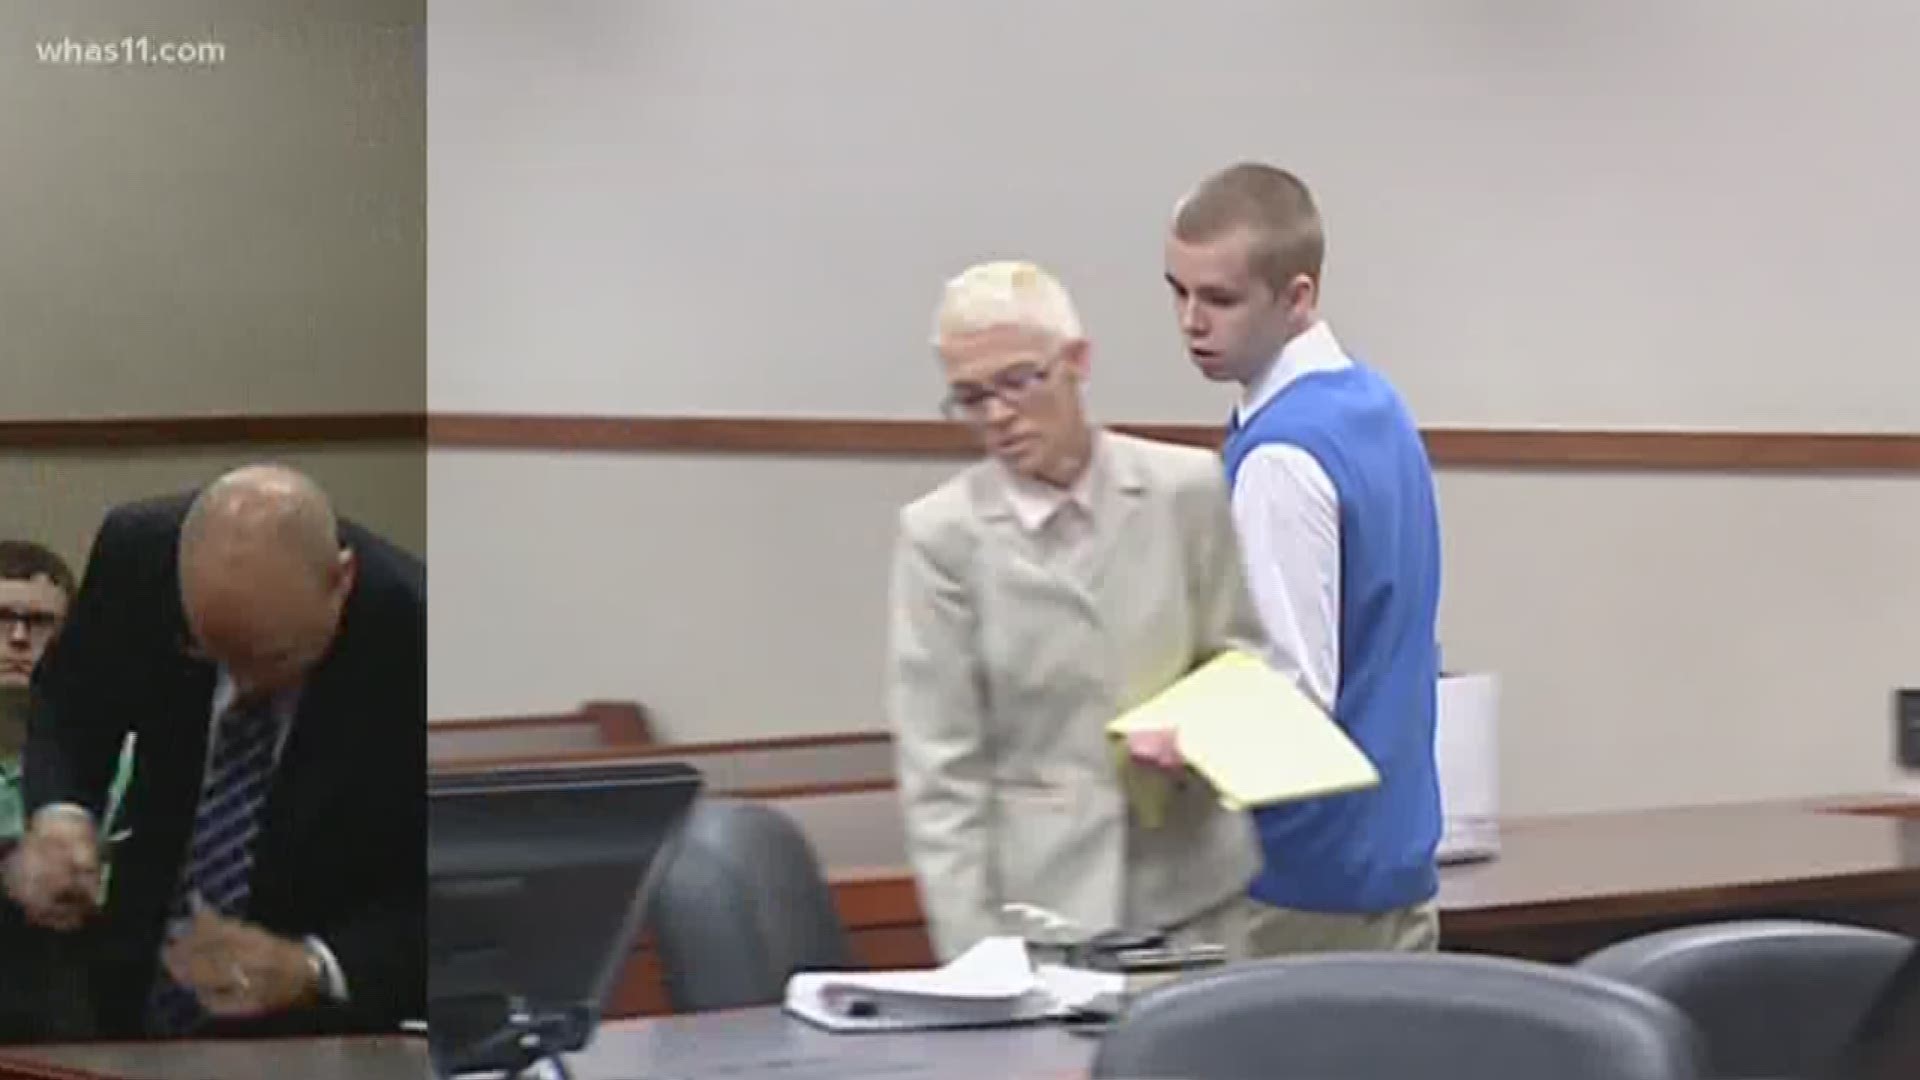 A new confession letter by Josh Young - acquitted in the 2011 Louisville murder of his 14 year-old step brother, he now claims *he* was the one who beat Trey Zwicker to death.